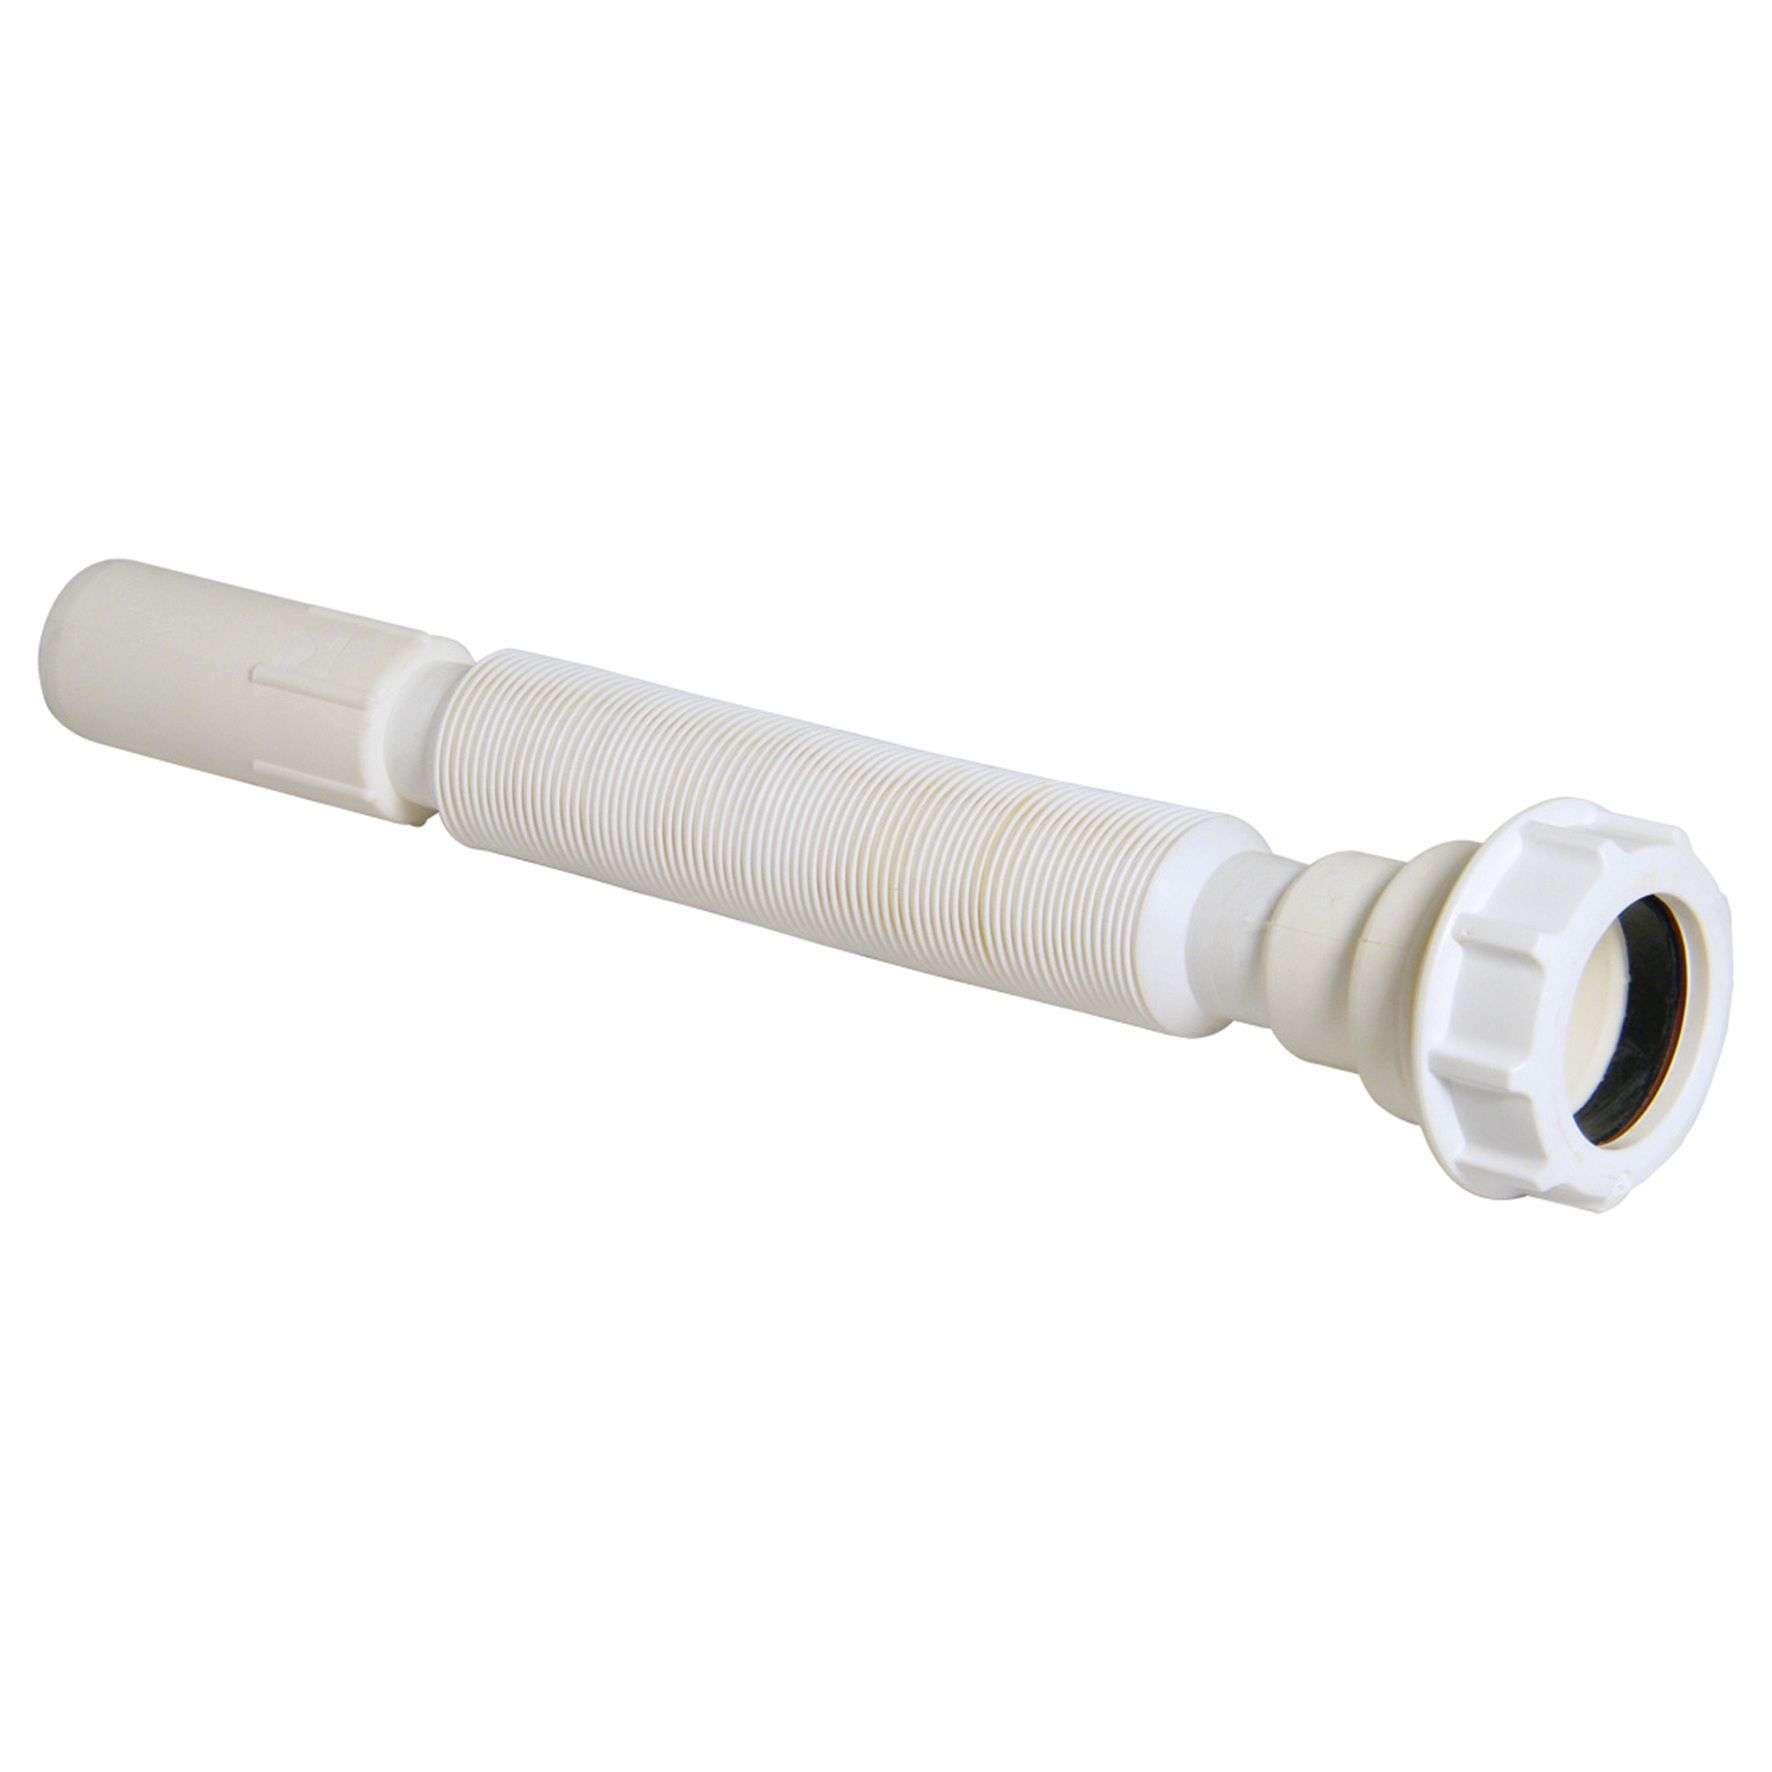 Image of FloPlast FT40 Flexible Waste Pipe - 40mm